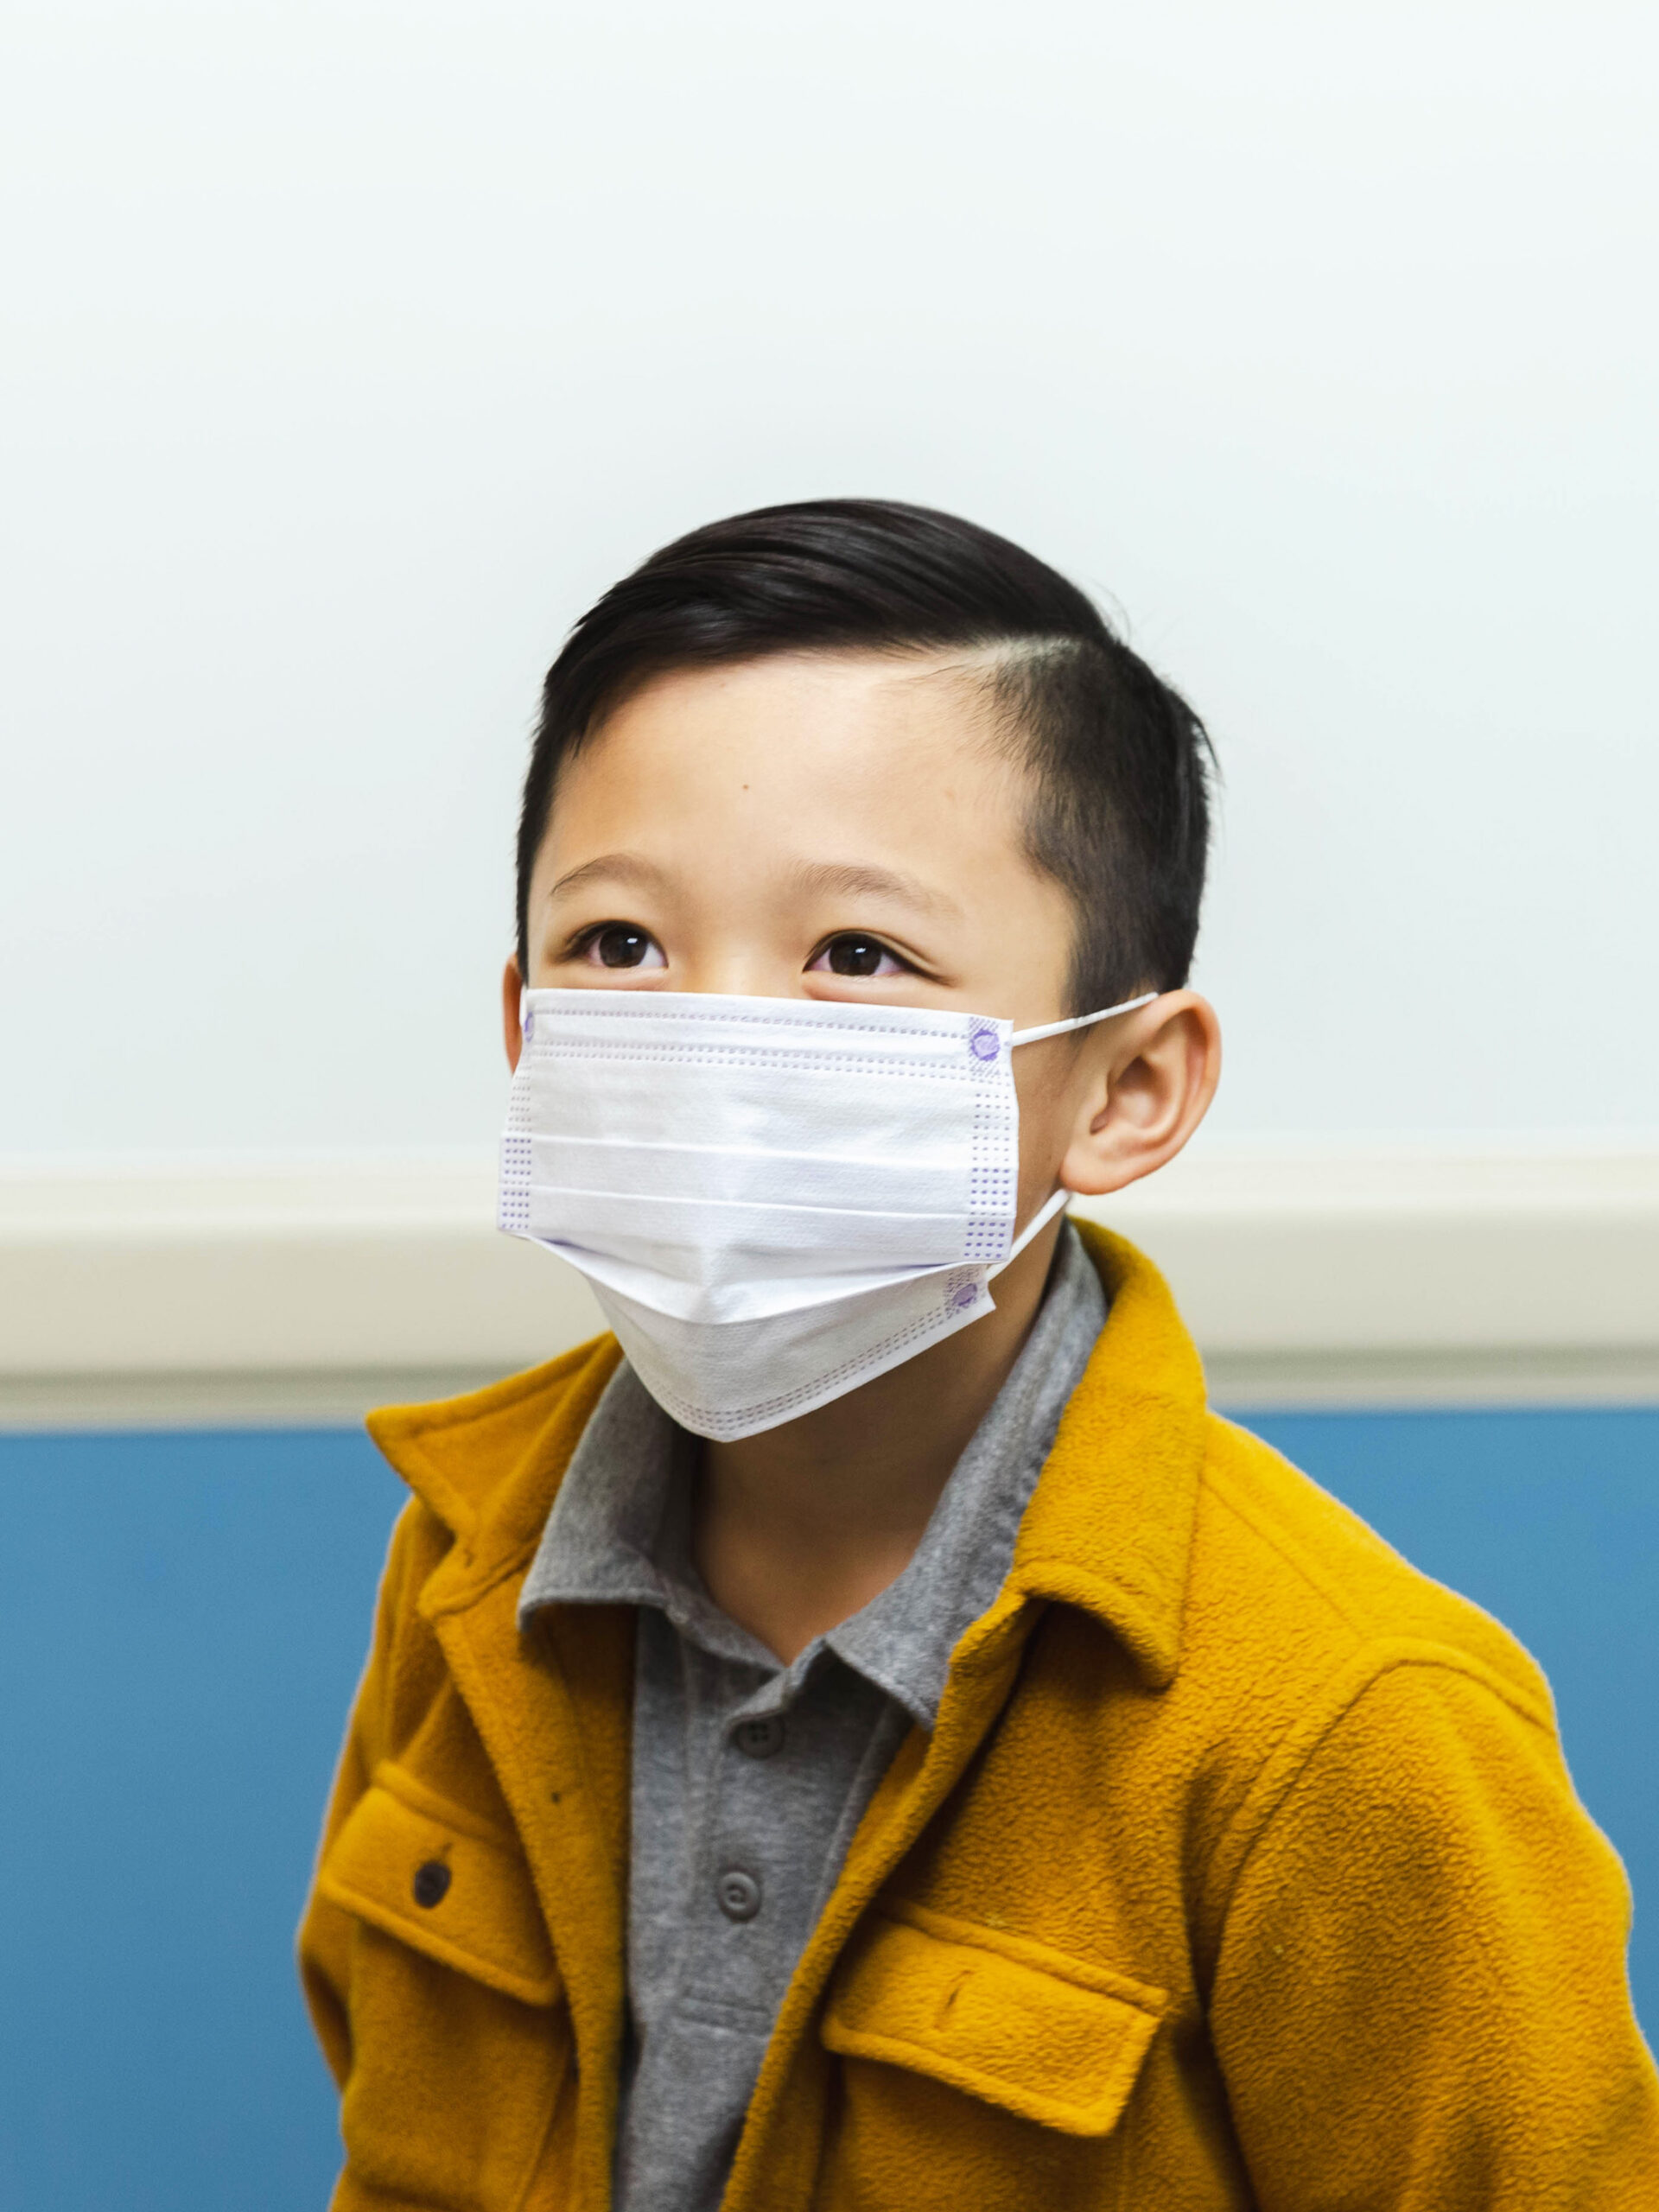 Child looks up while wearing mask at the pediatrician's office